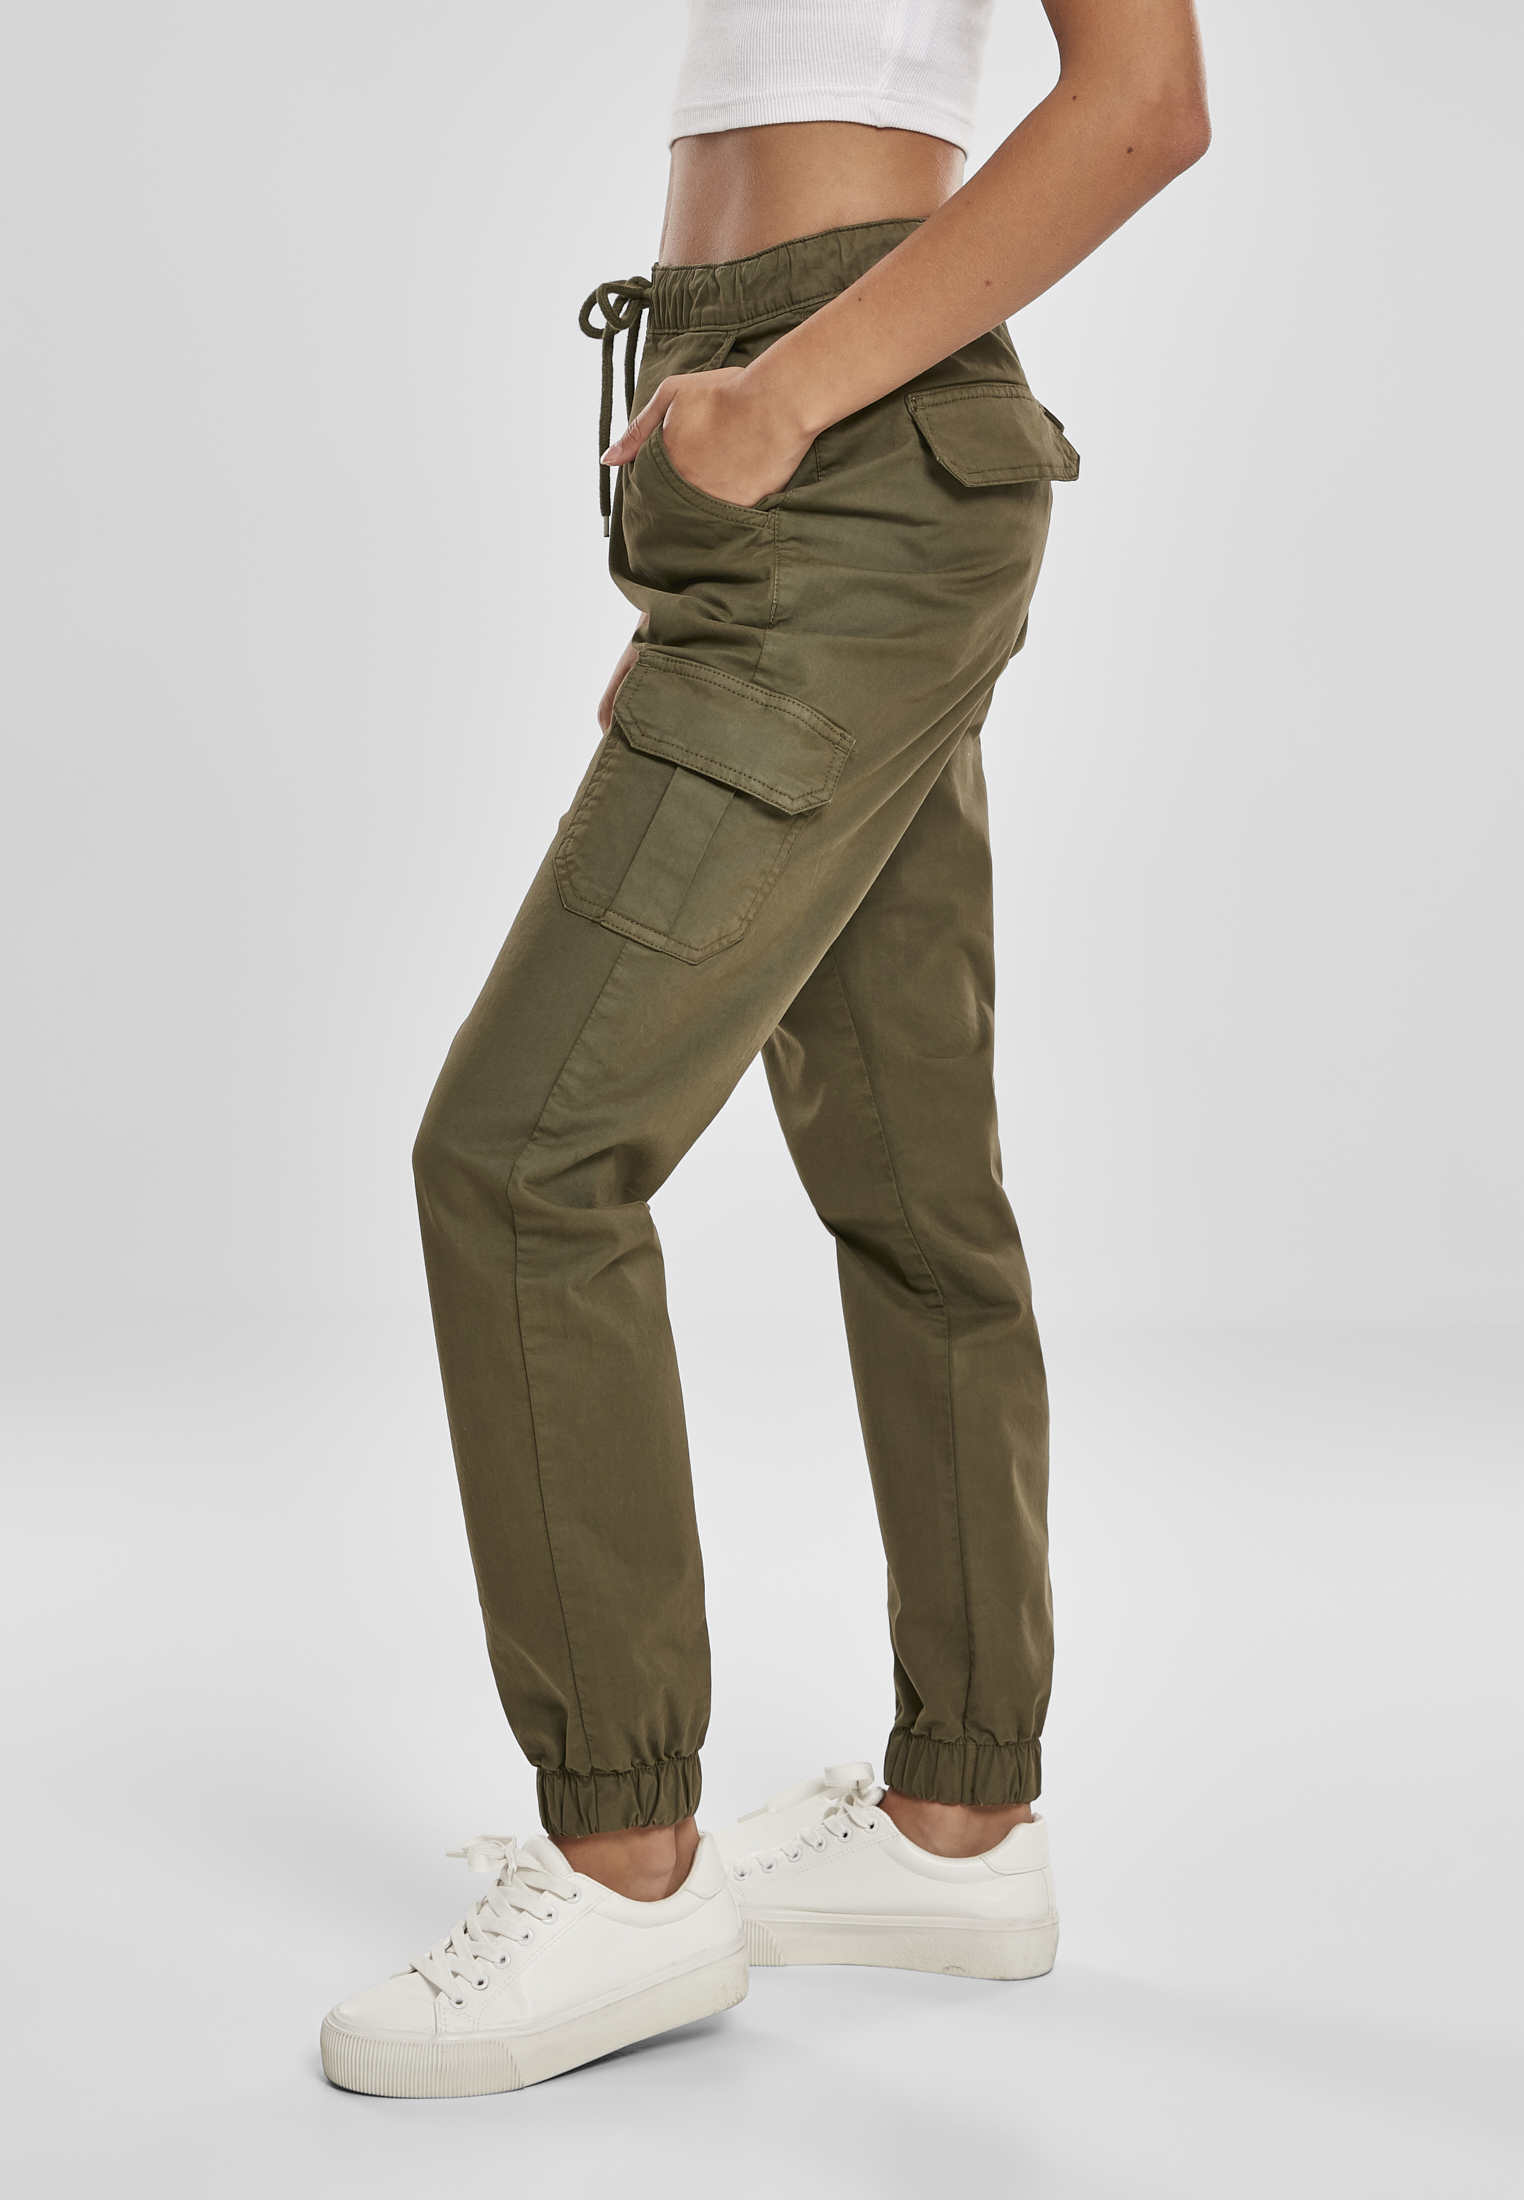 Curvy Ladies High Waist Cargo Jogging Pants in Farbe summerolive